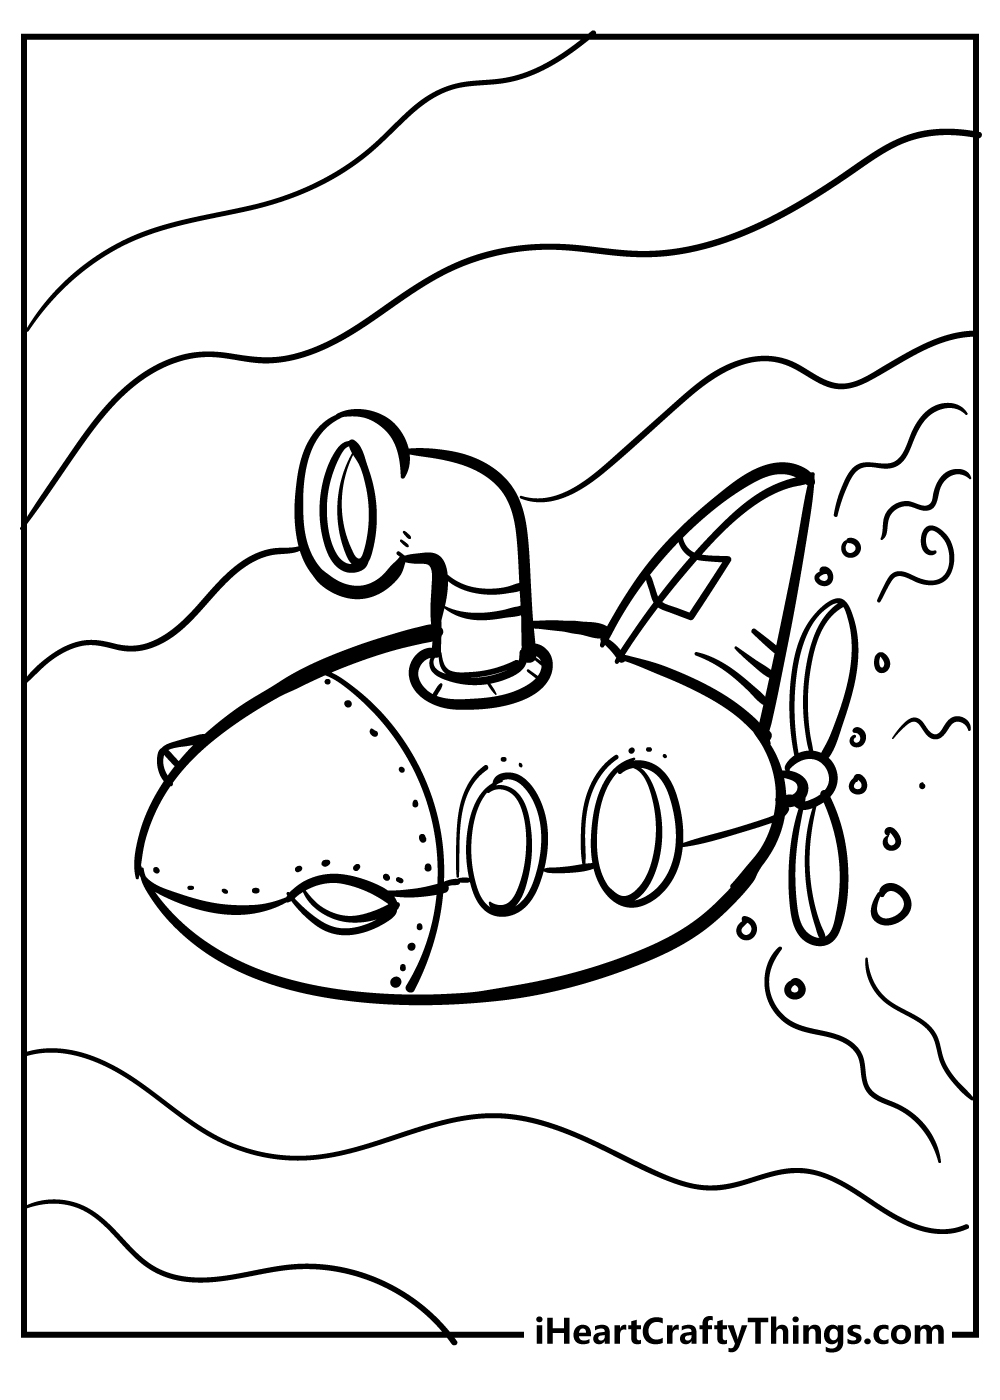 Submarine Coloring Sheet for children free download